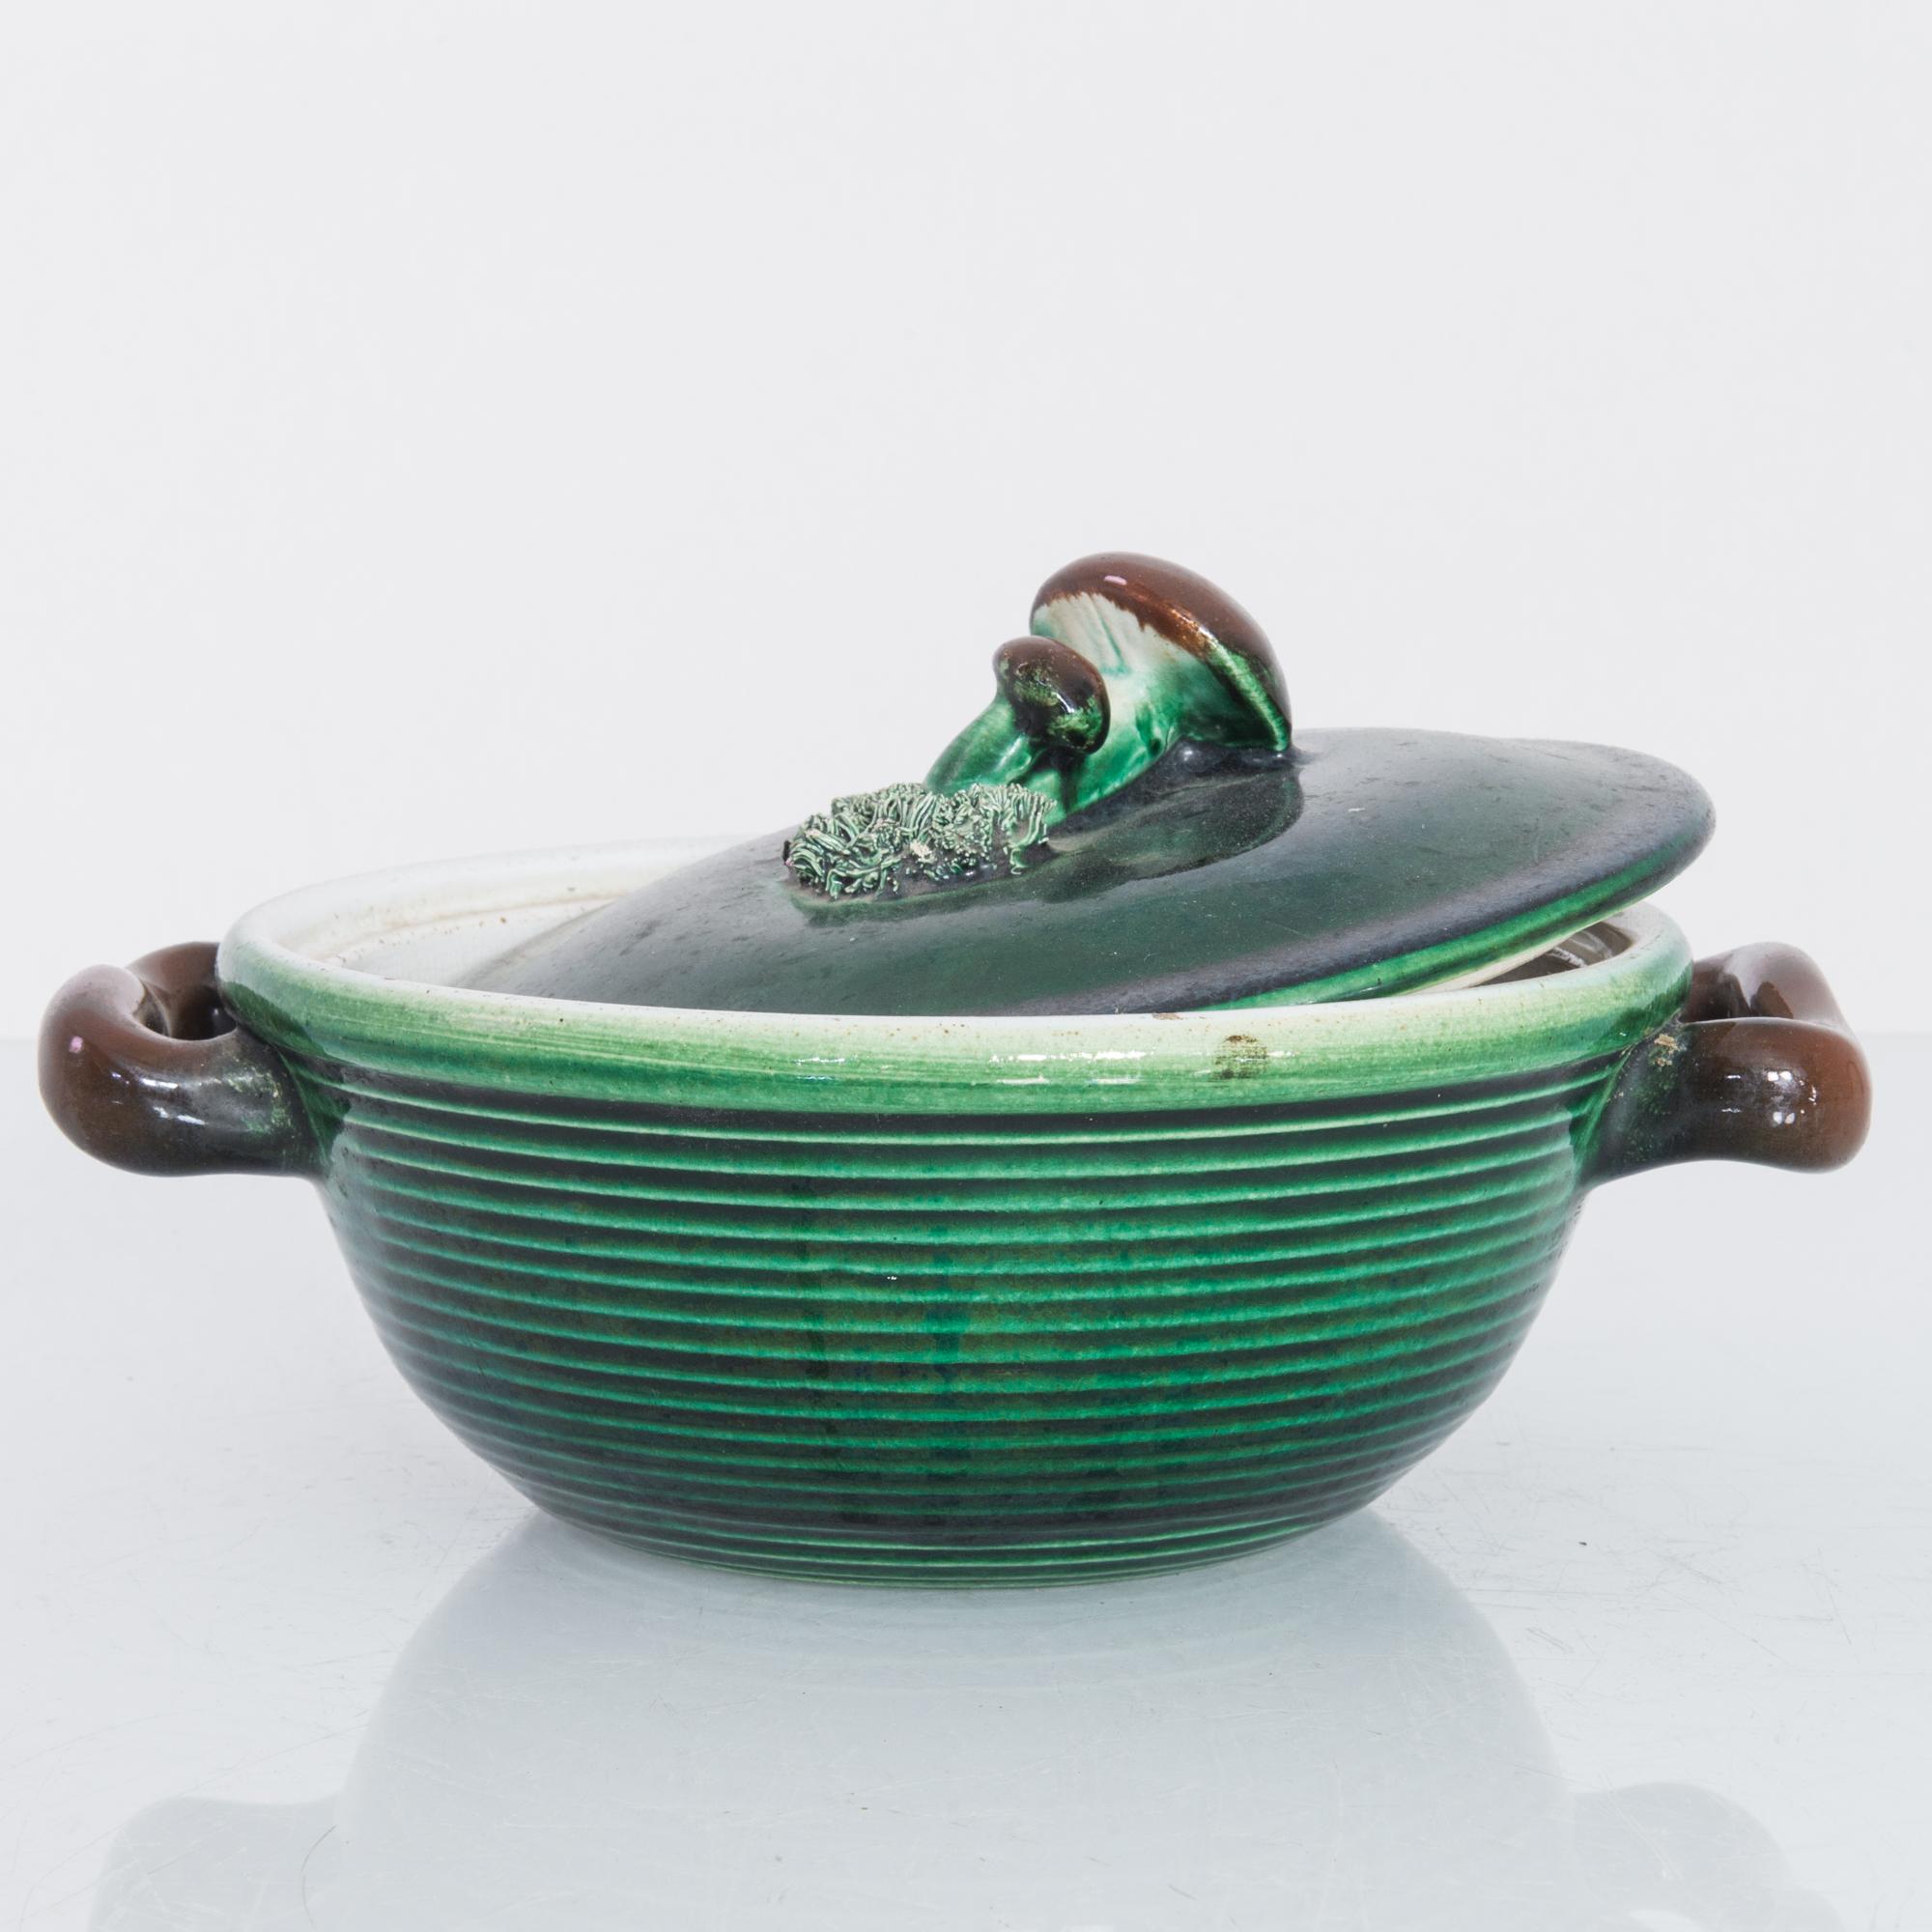 A ceramic bowl with lid from Belgium, circa 1930. A ‘Tellurite’ lidded tureen in rich earth tones of green around the body and brown handles. This piece’s personality stems primarily from the mushroom bunch decoration on the lid, springing forth